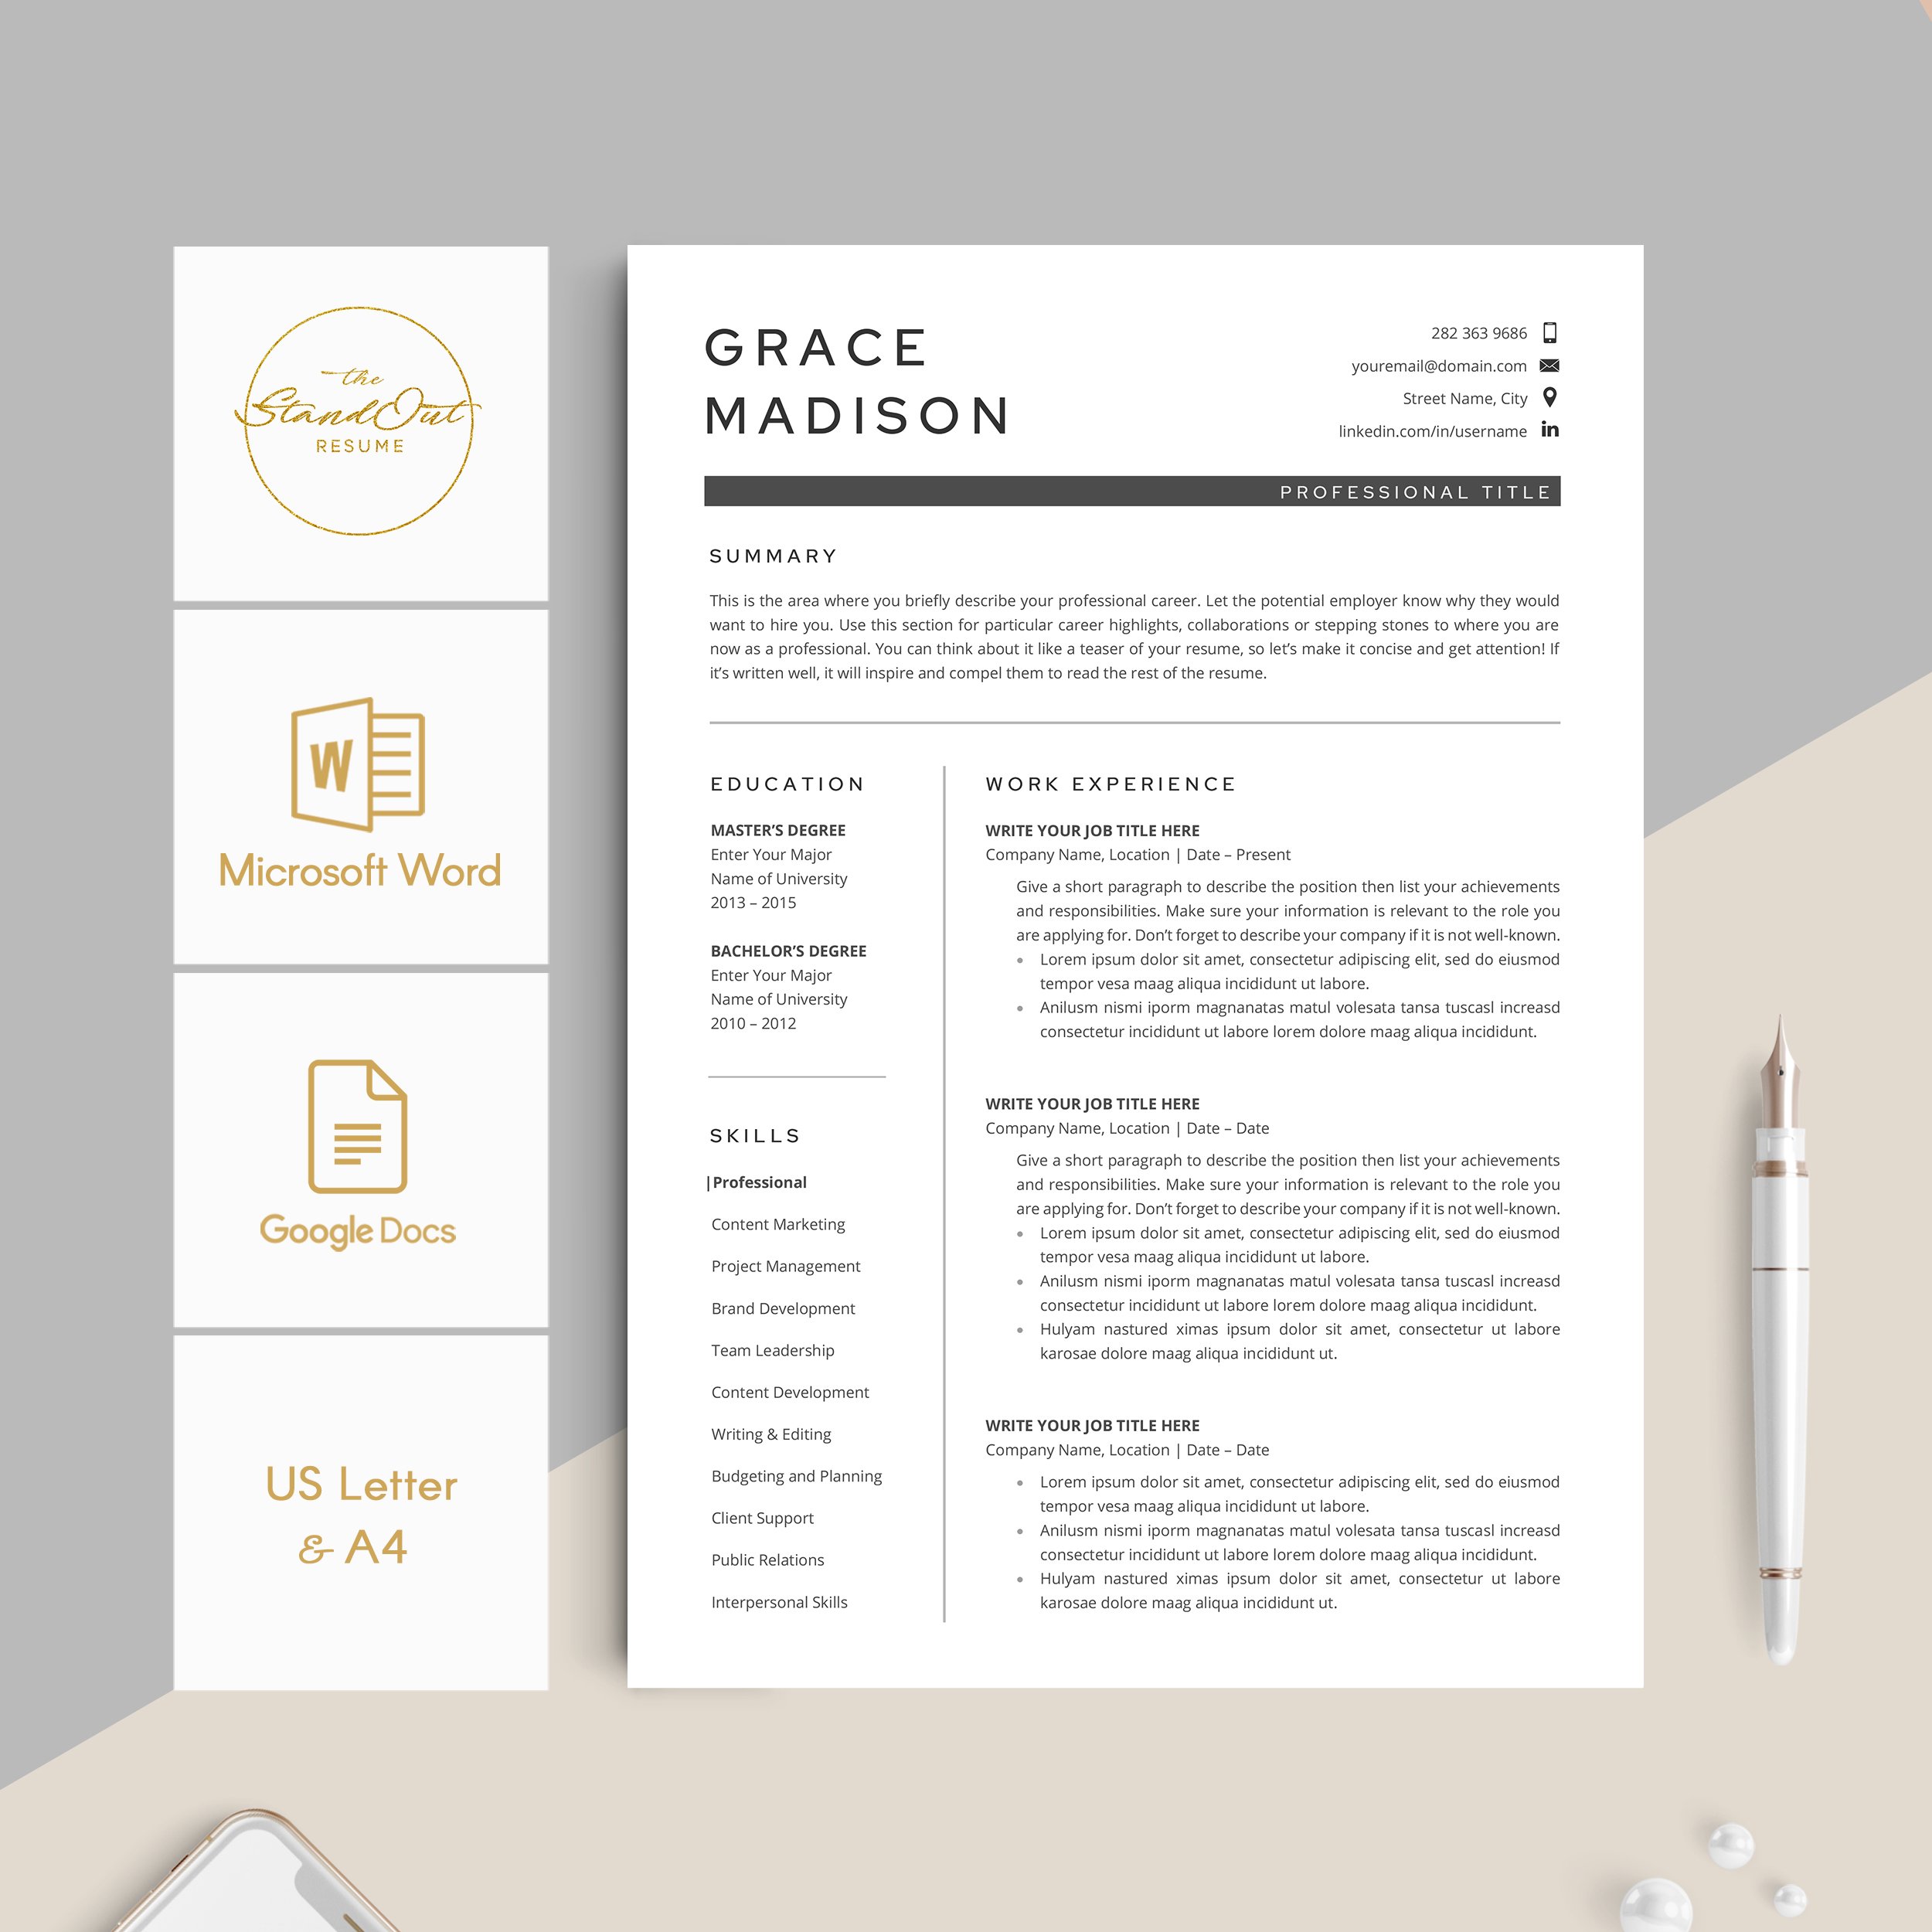 Resume/CV Template - GRACE preview image.